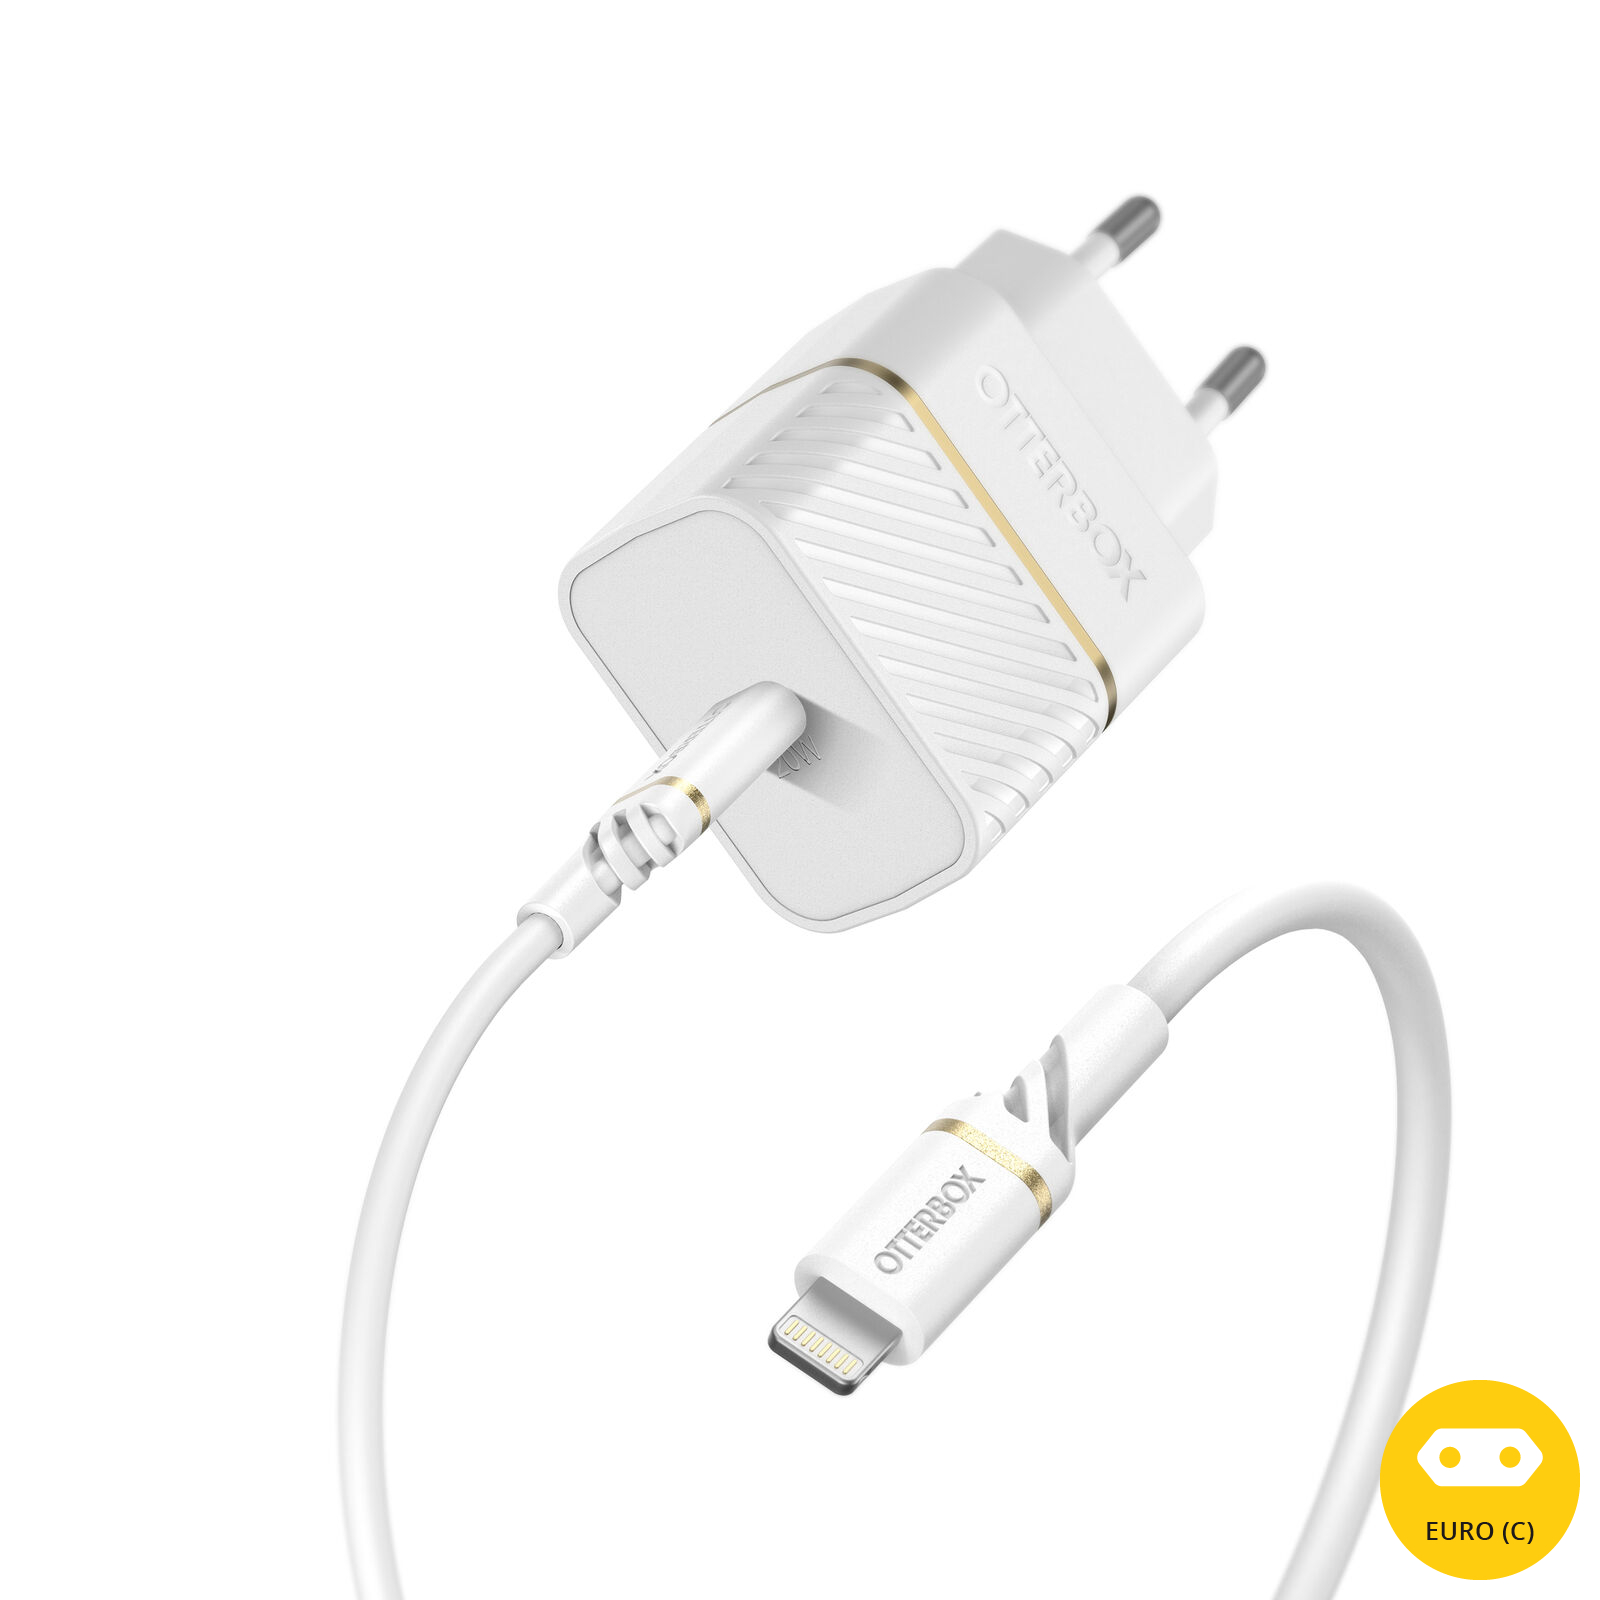 Chargeur rapide USB-C 20W + Cable de charge Type C vers Lightning